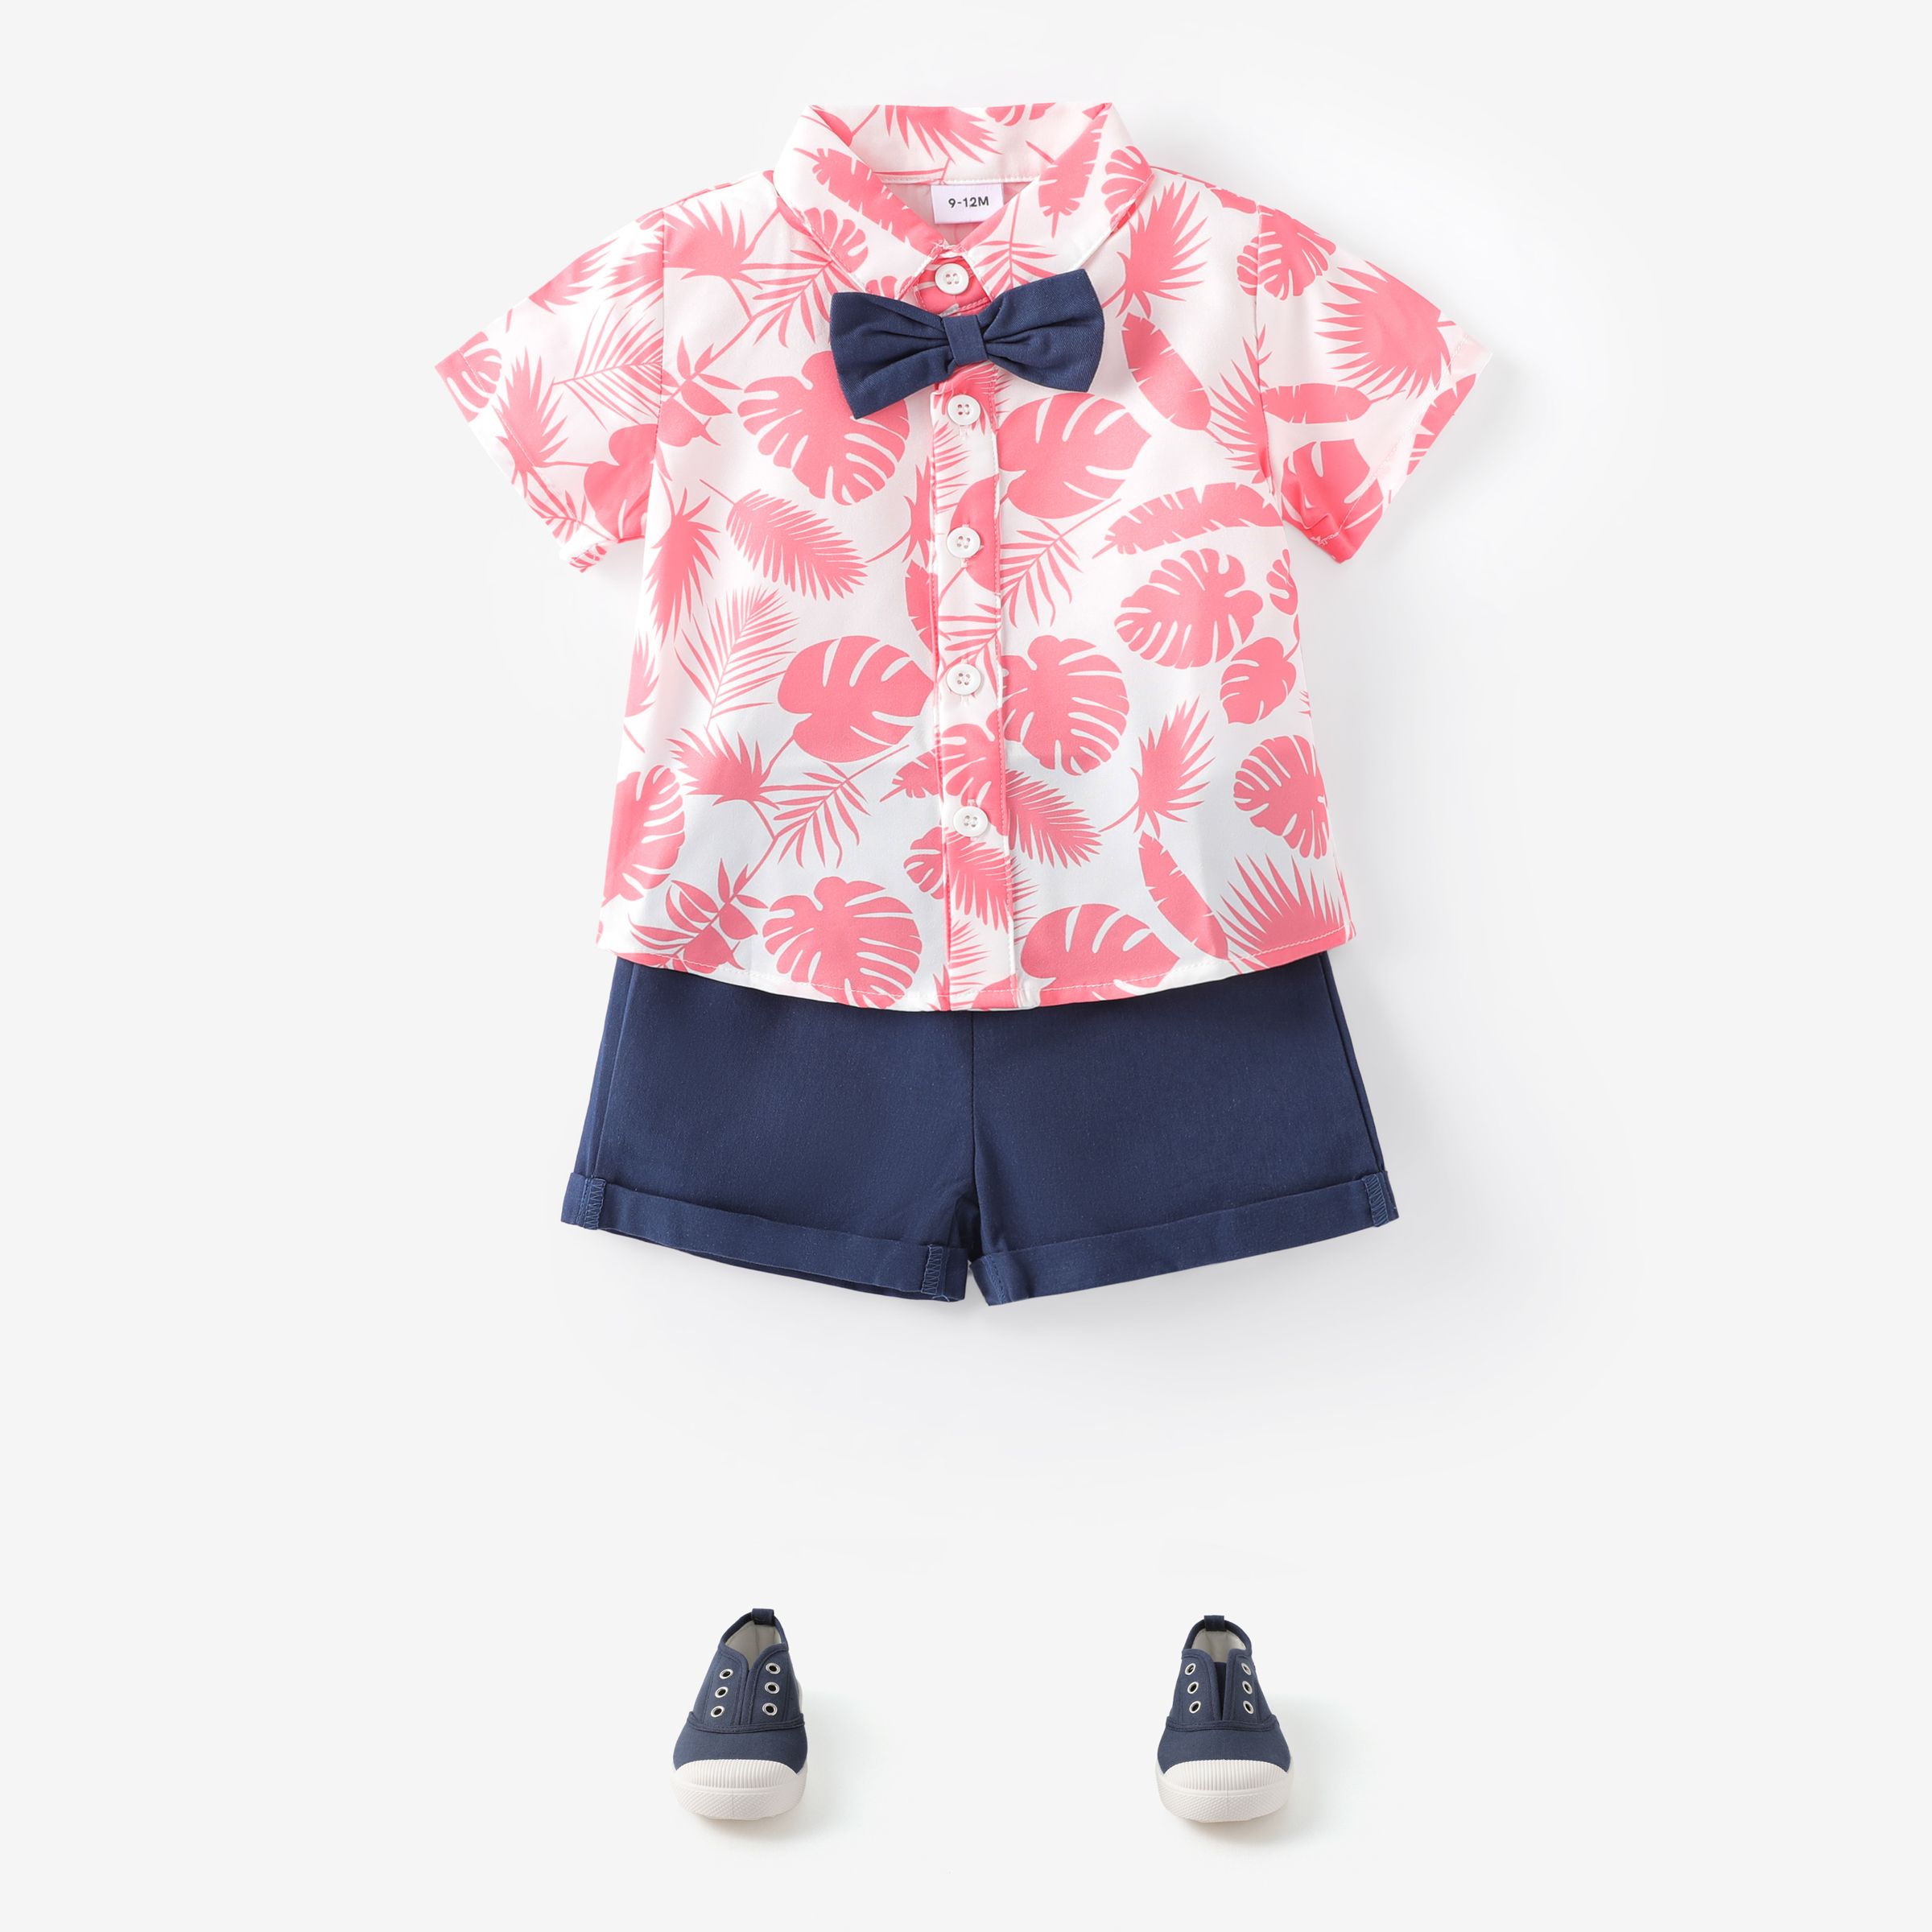 2pcs Baby Boy Allover Pink Leaf Print Short-sleeve Bow Tie Shirt And Solid Shorts Set